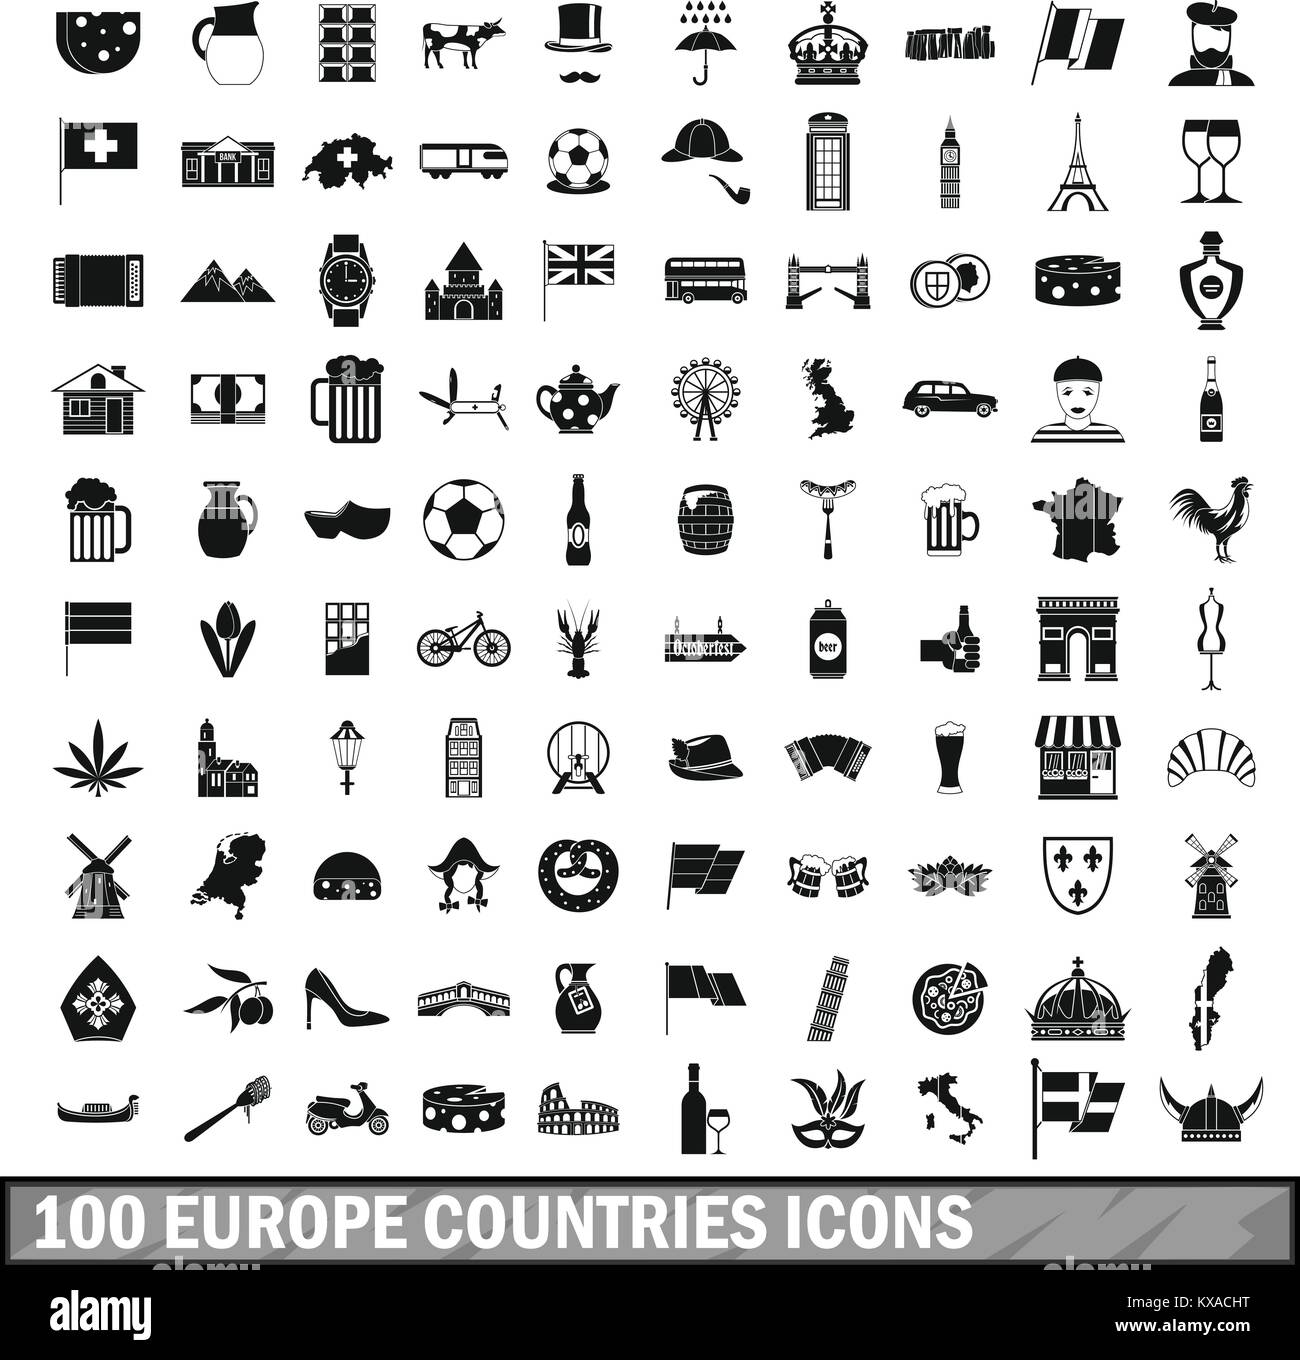 100 europe countries icons set in simple style Stock Vector